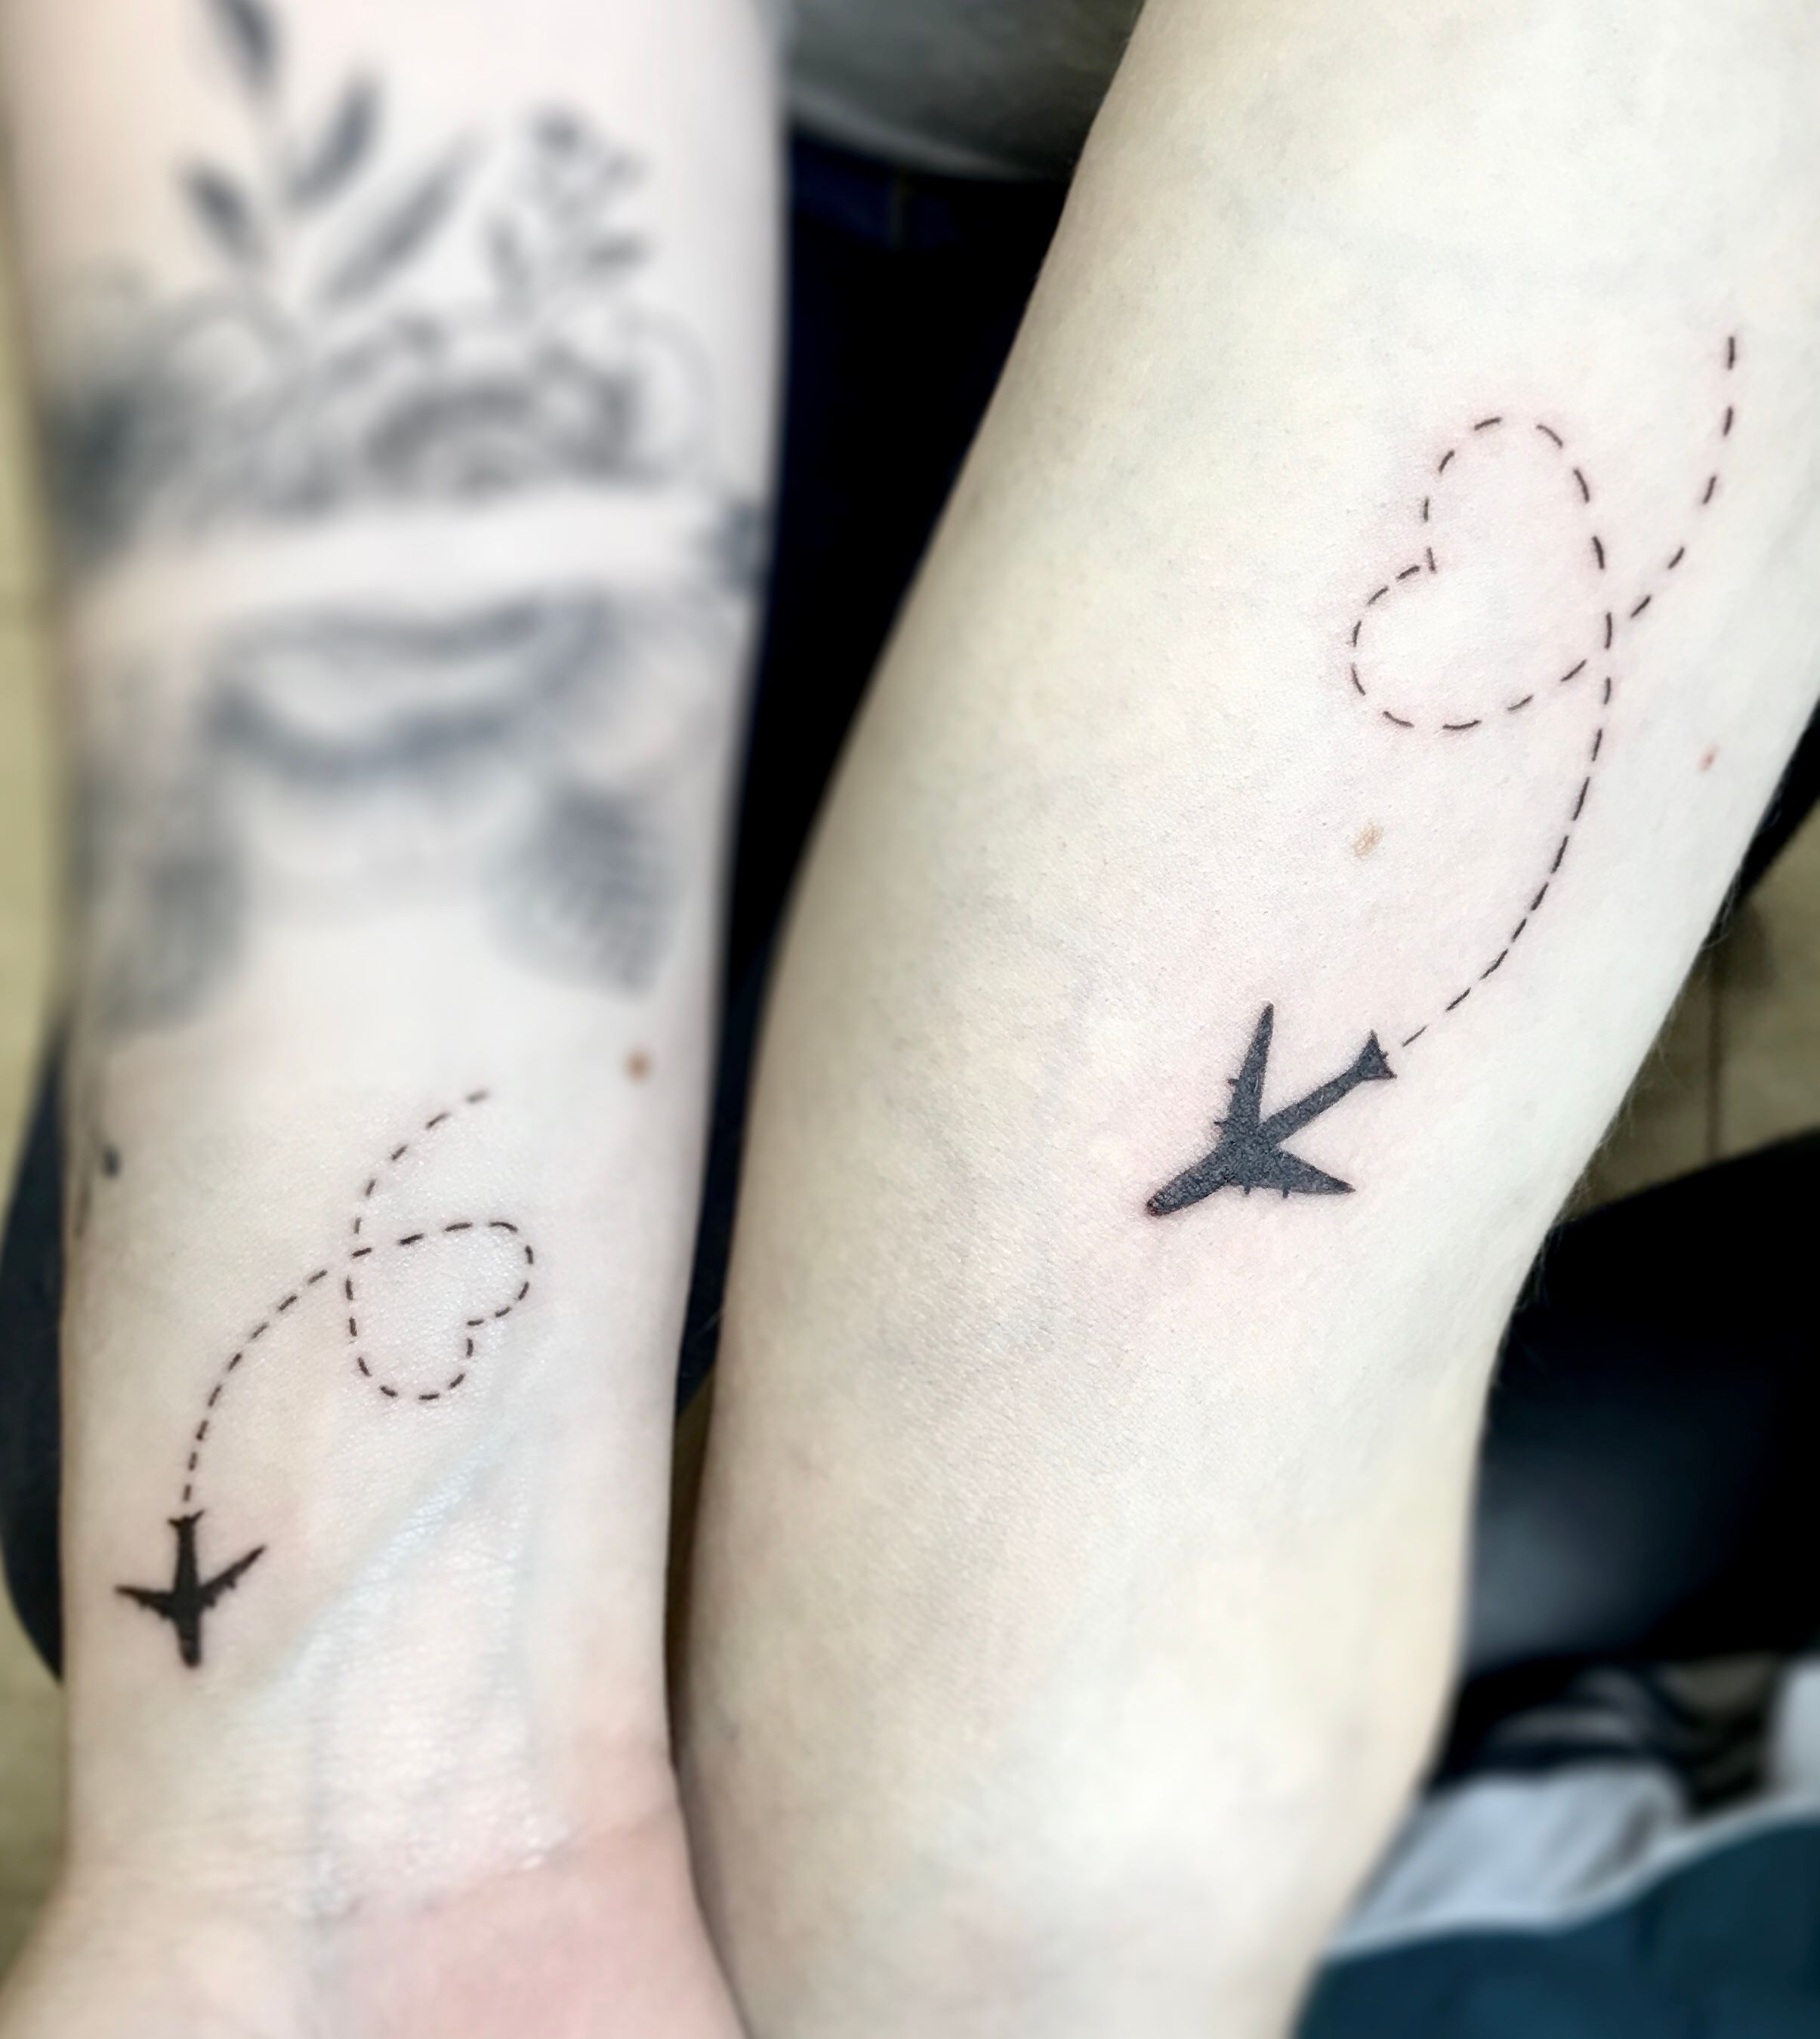 Kaley Cuoco and Zosia Mamet get the sweetest matching tattoos